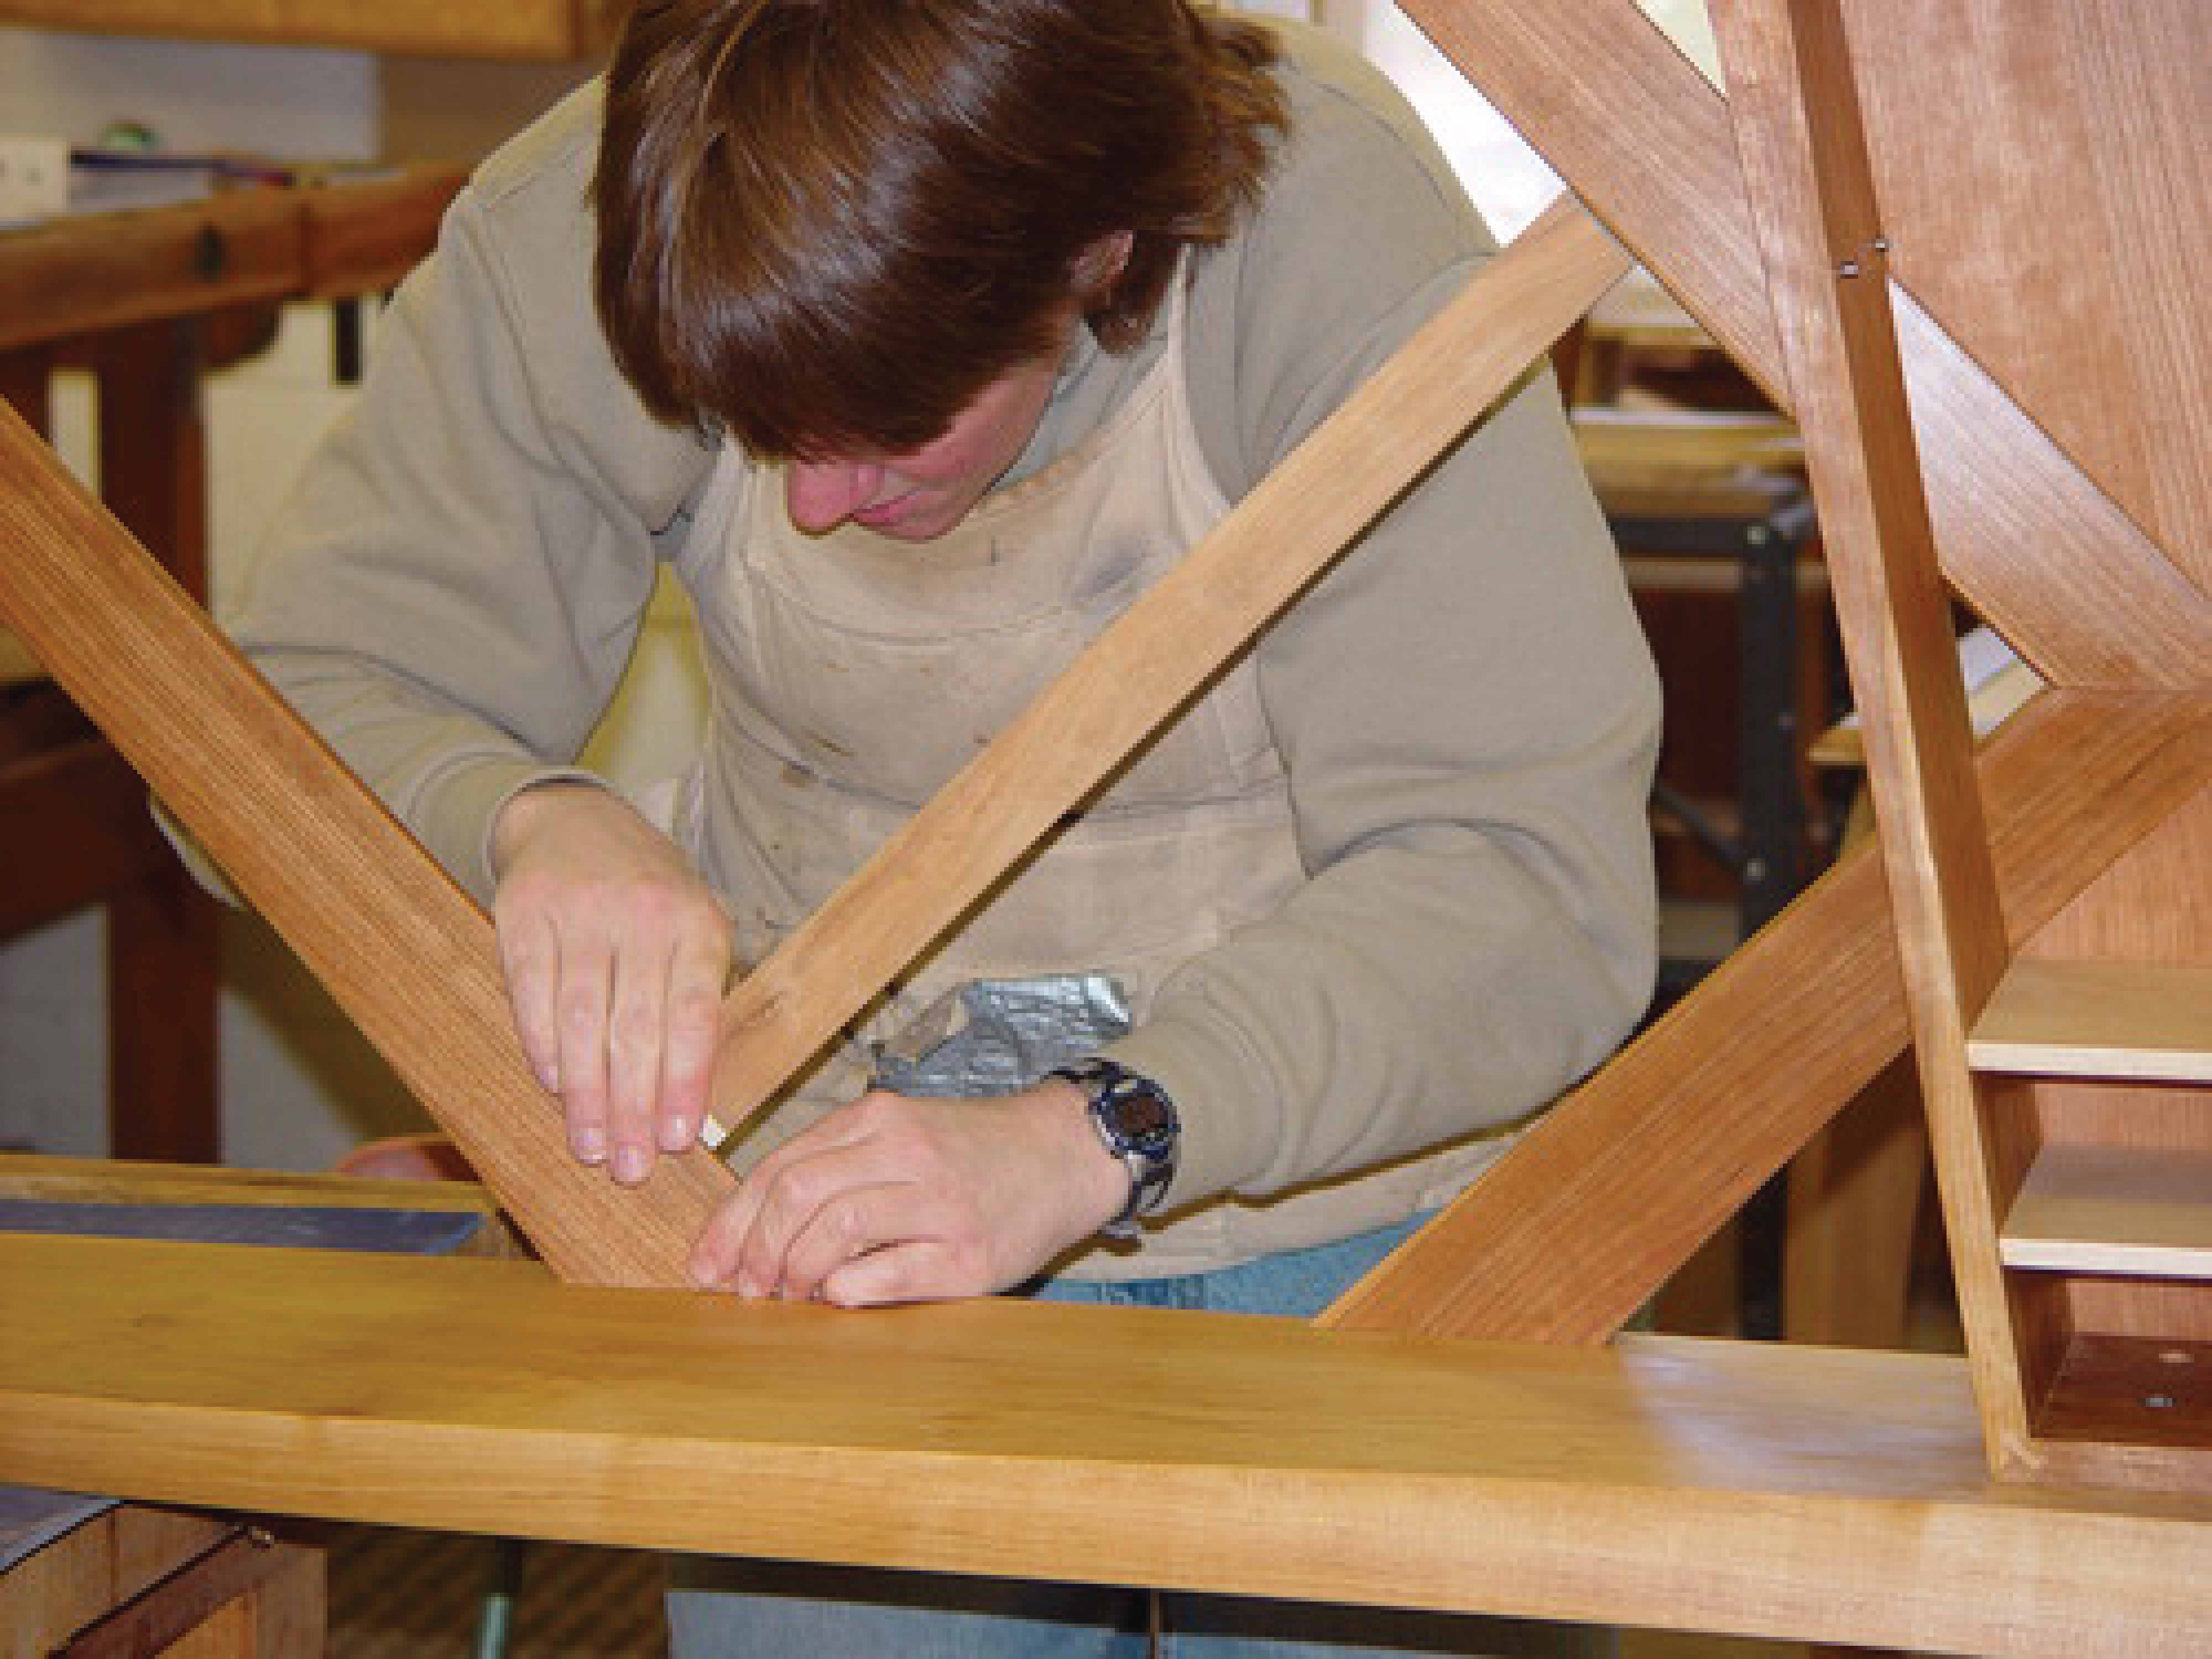 A close up of hands working with wood in a woodworking setting.